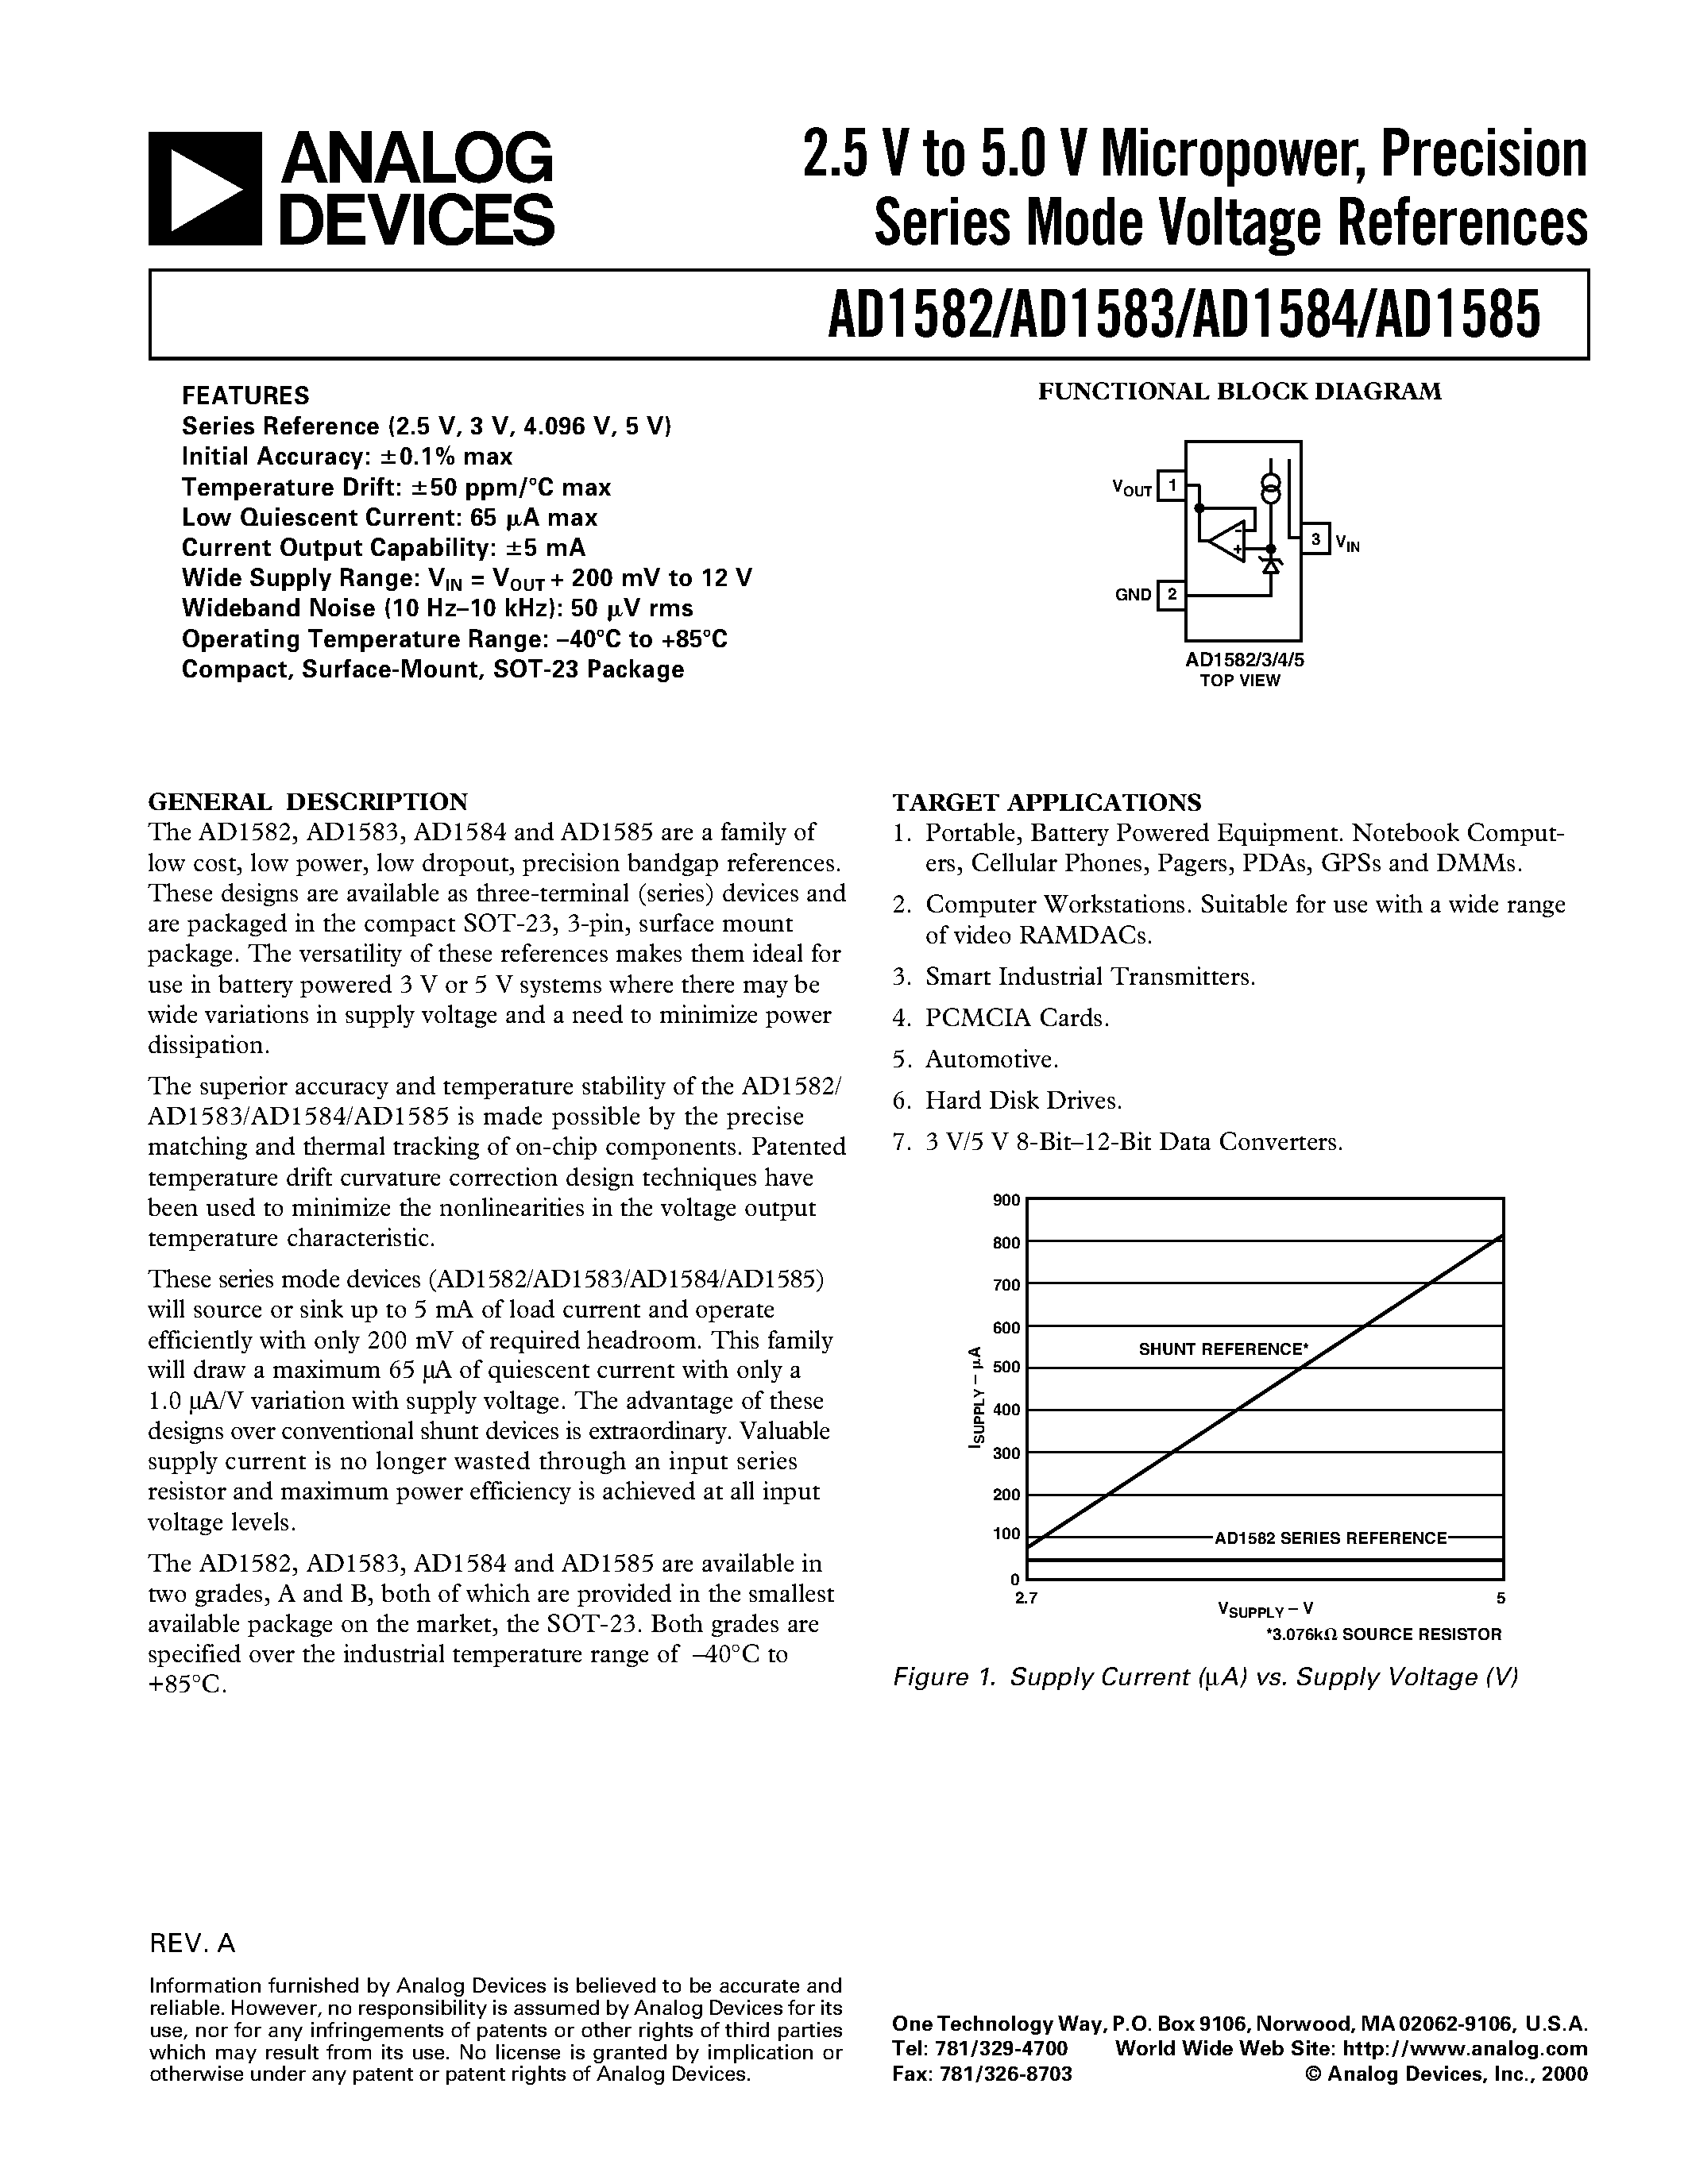 Даташит AD1585B - 2.5 V to 5.0 V Micropower/ Precision Series Mode Voltage References страница 1